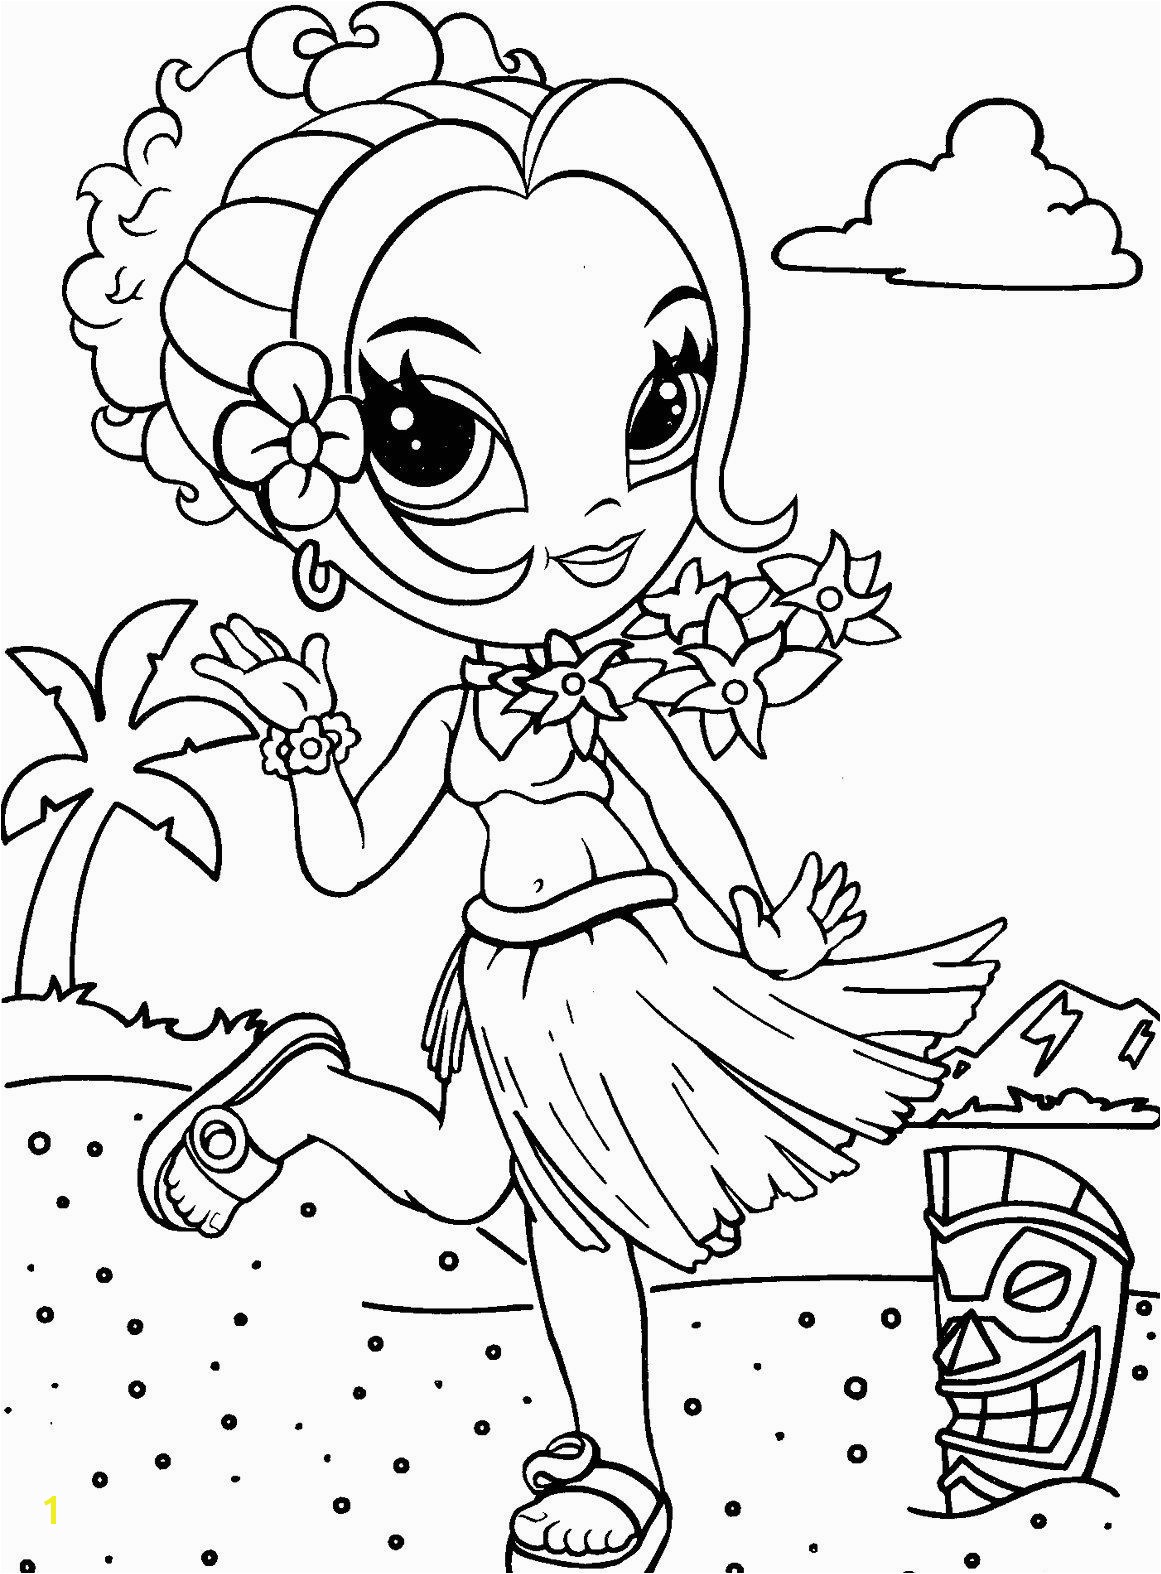 Lisa Frank Cat Coloring Pages Lisa Frank Coloring Pages to and Print for Free